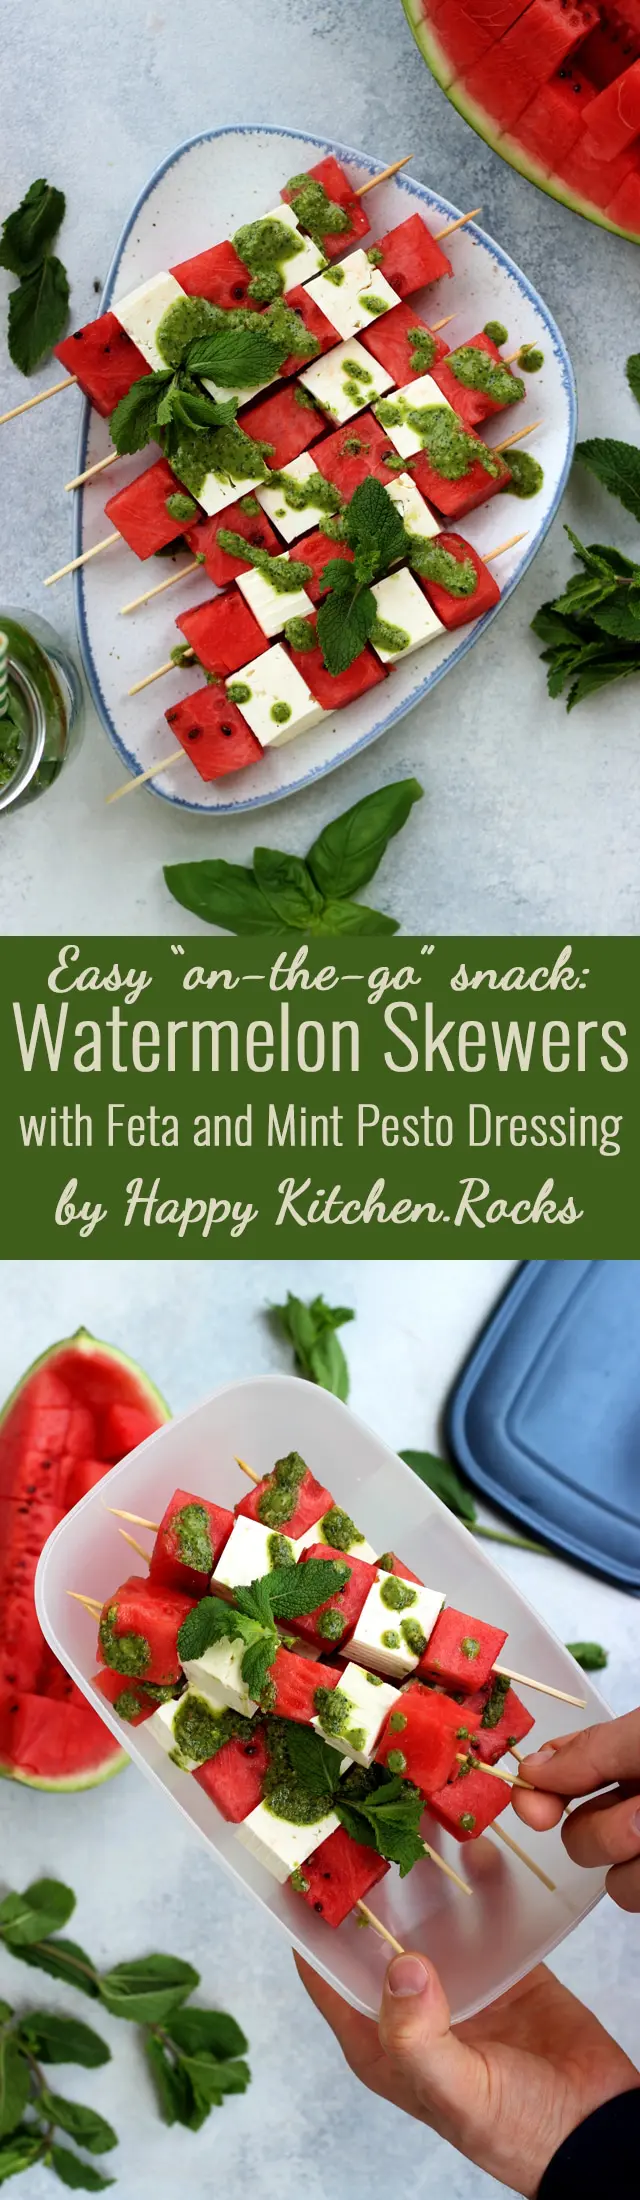 These take-along watermelon skewers with feta and mint pesto dressing are a quick and easy appetizer or snack for your next outdoor gathering, BBQ or picnic! Enjoy these delicious and healthy watermelon skewers on a hot summer day! #WatermelonOnTheGo #ad #summerrecipes #watermelon #feta #skewers #bbq #picnicrecipe #easyrecipes #recipes #cleaneating #pesto #peppermint #appetizer #snacks #onthego #healthysnacks